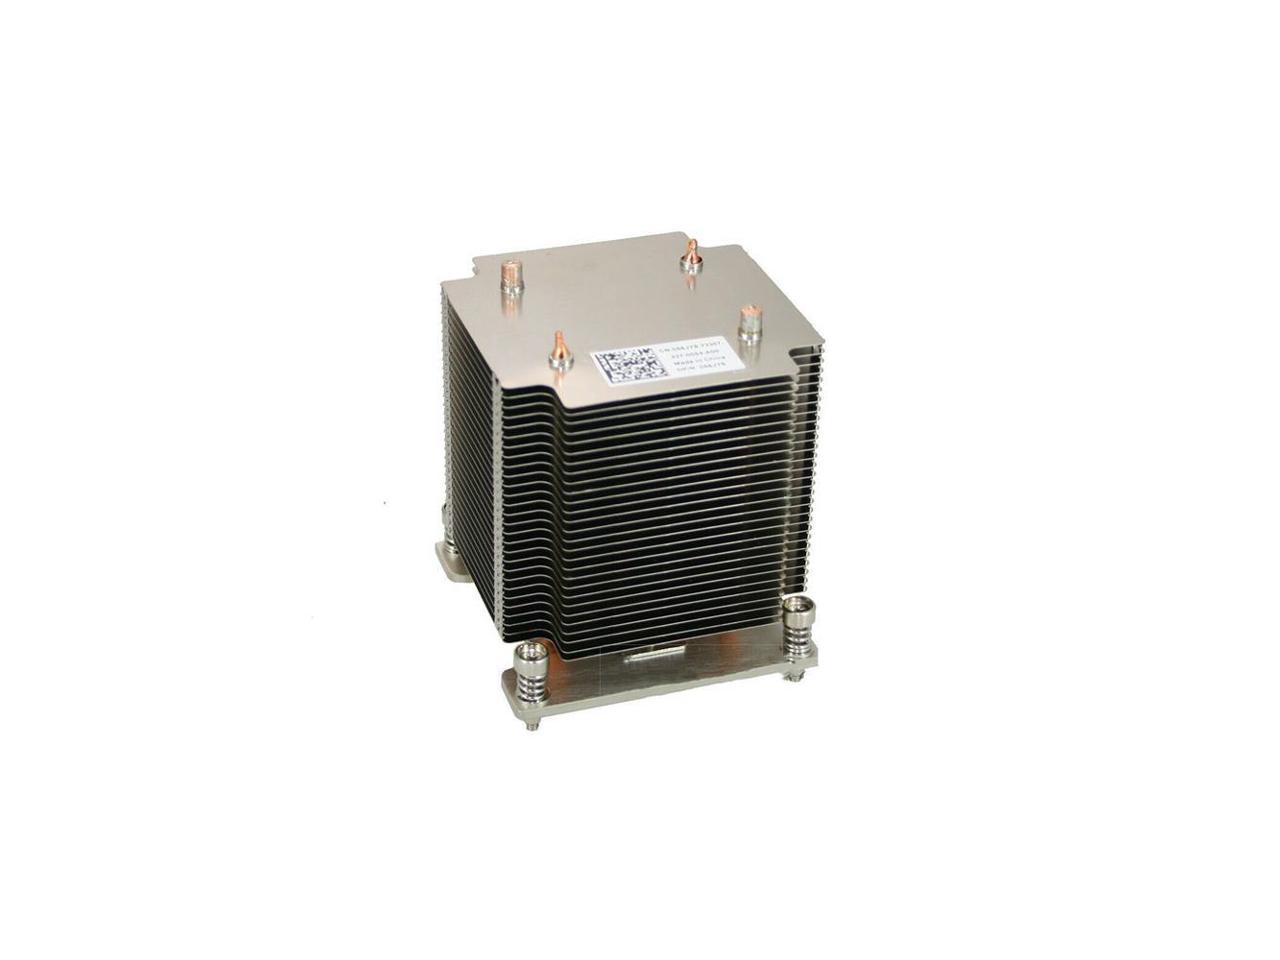 New 056JY6 Dell PowerEdge T620 Heatsink with Grease 